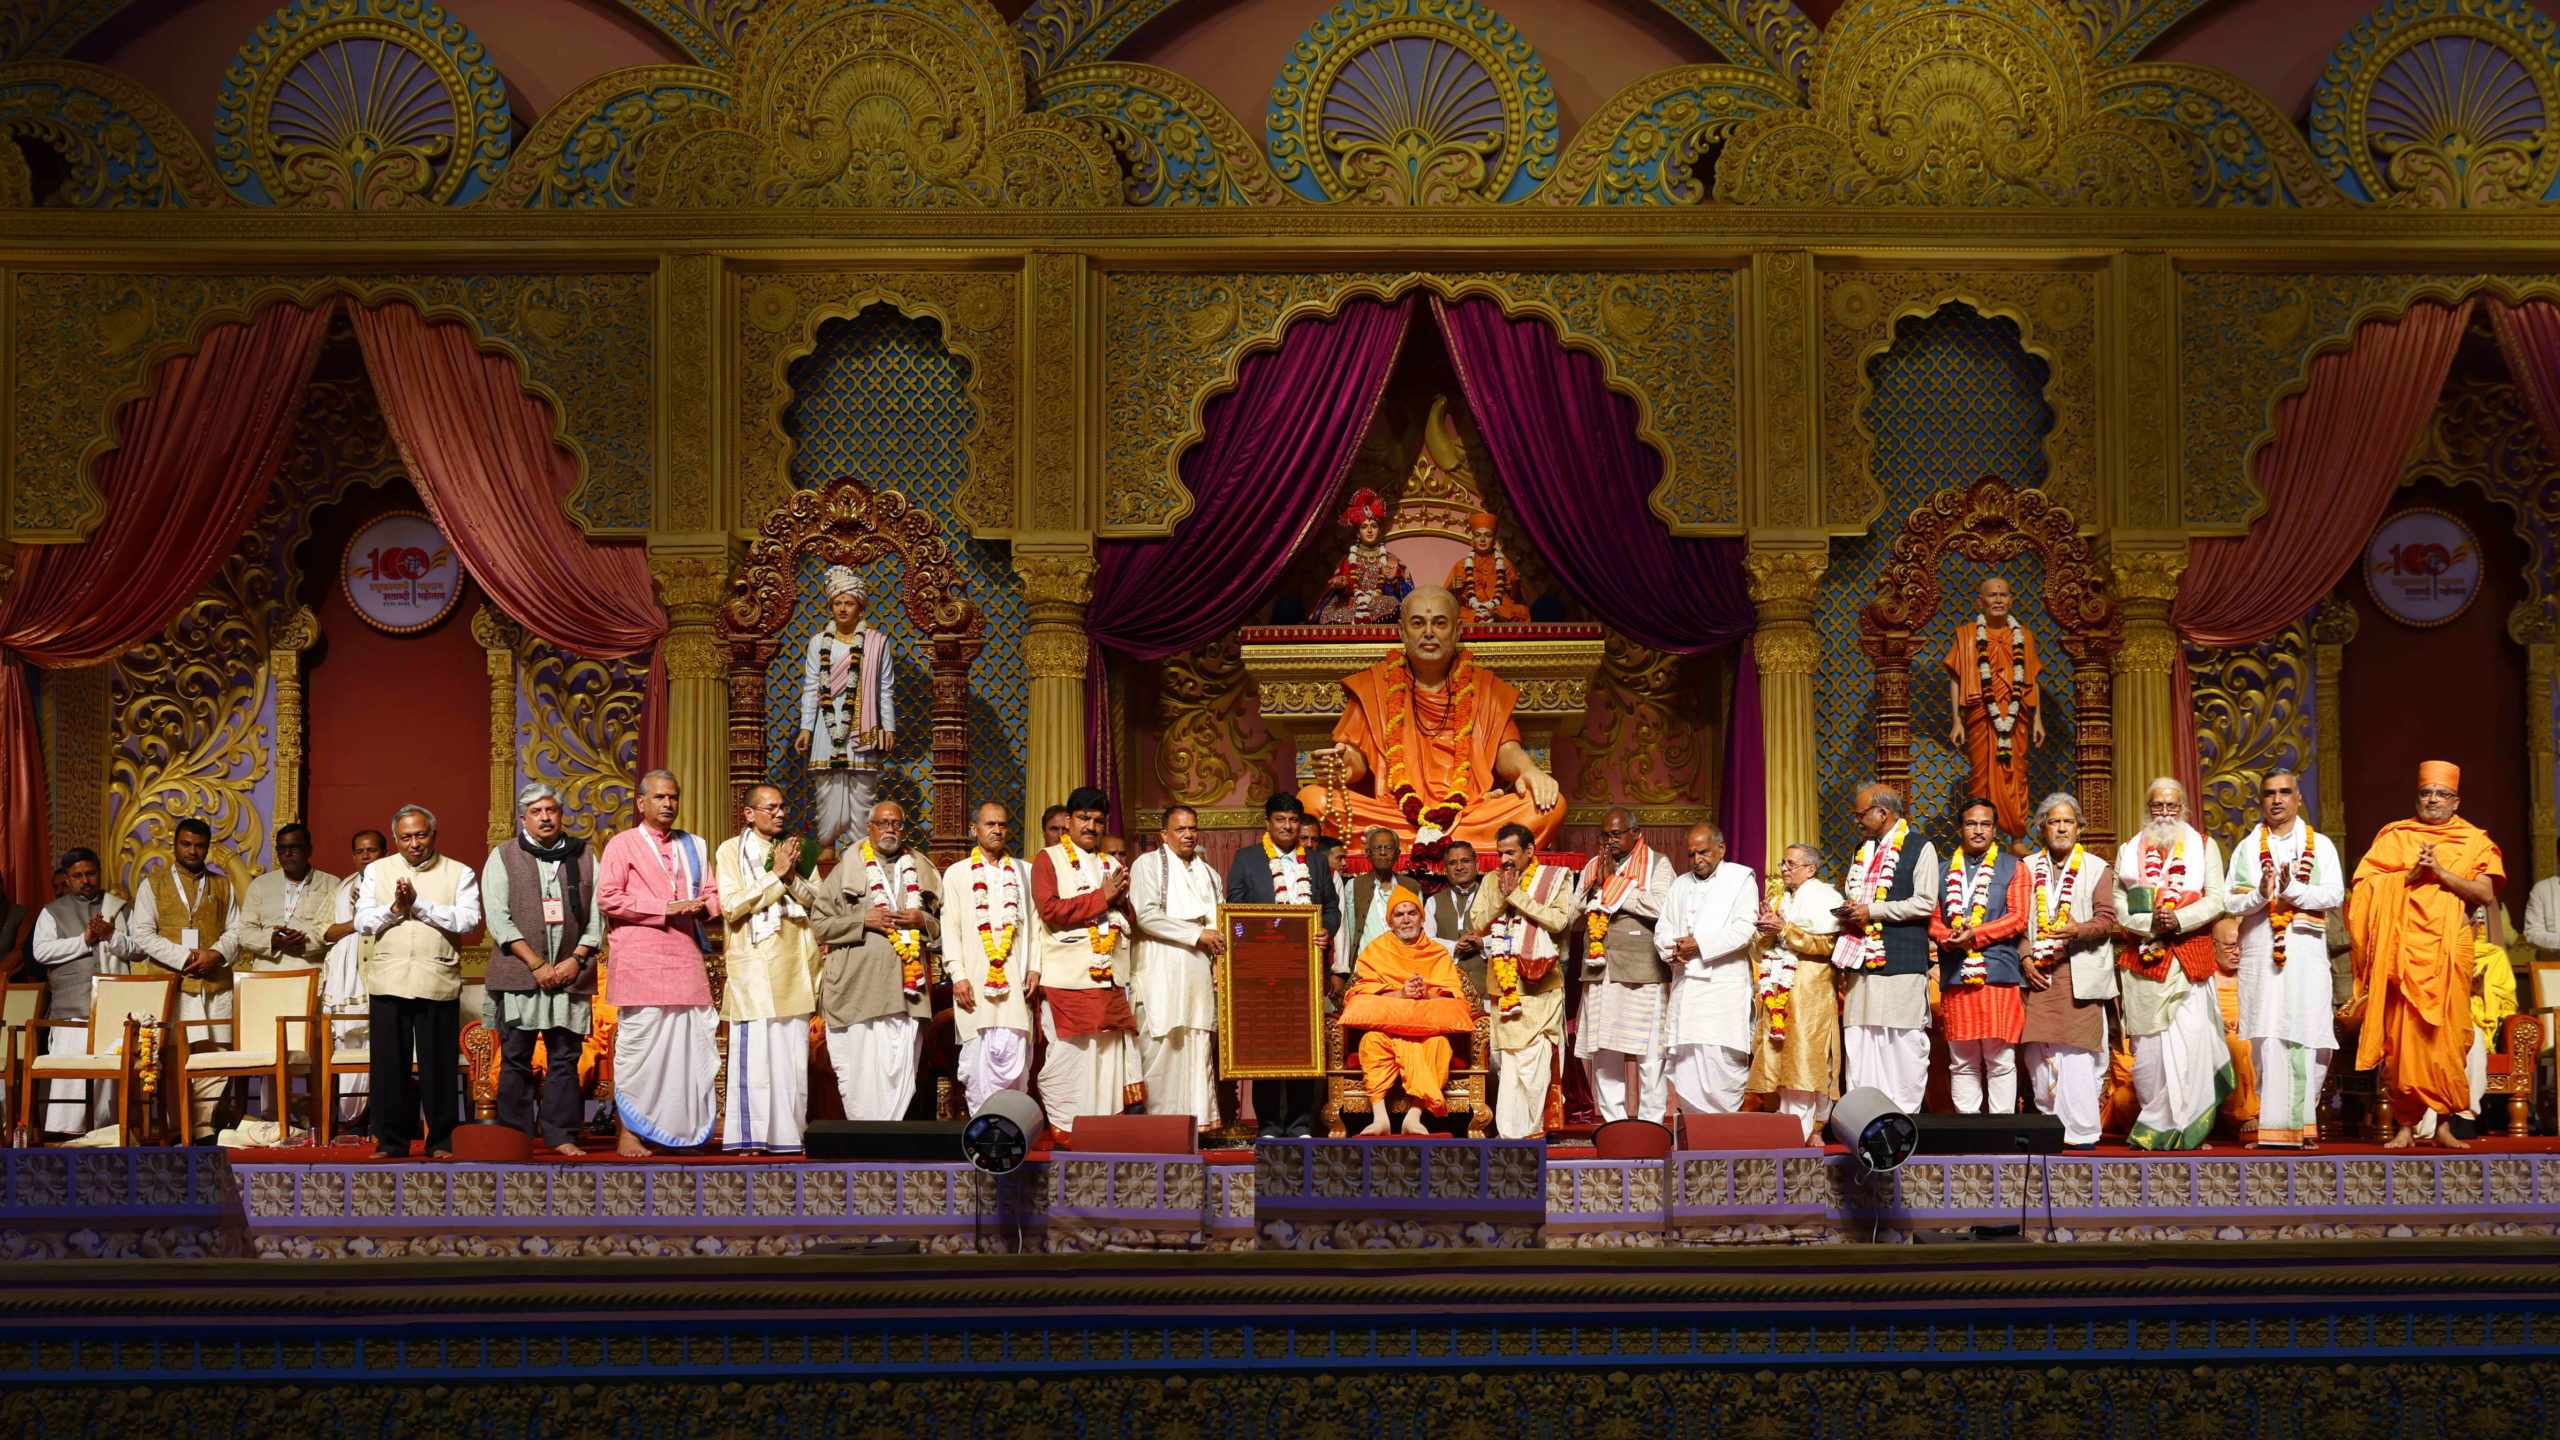 Pramukh Swami Maharaj was conferred the honor of 'Sanatan Dharma Jyoti' for his countless contributions to protect, foster and nourish the timeless wisdom of Hinduism and his continuous encouragement to preserve and promote the Vedic scriptural tradition by more than 30 eminent scholarsfrom all over India.